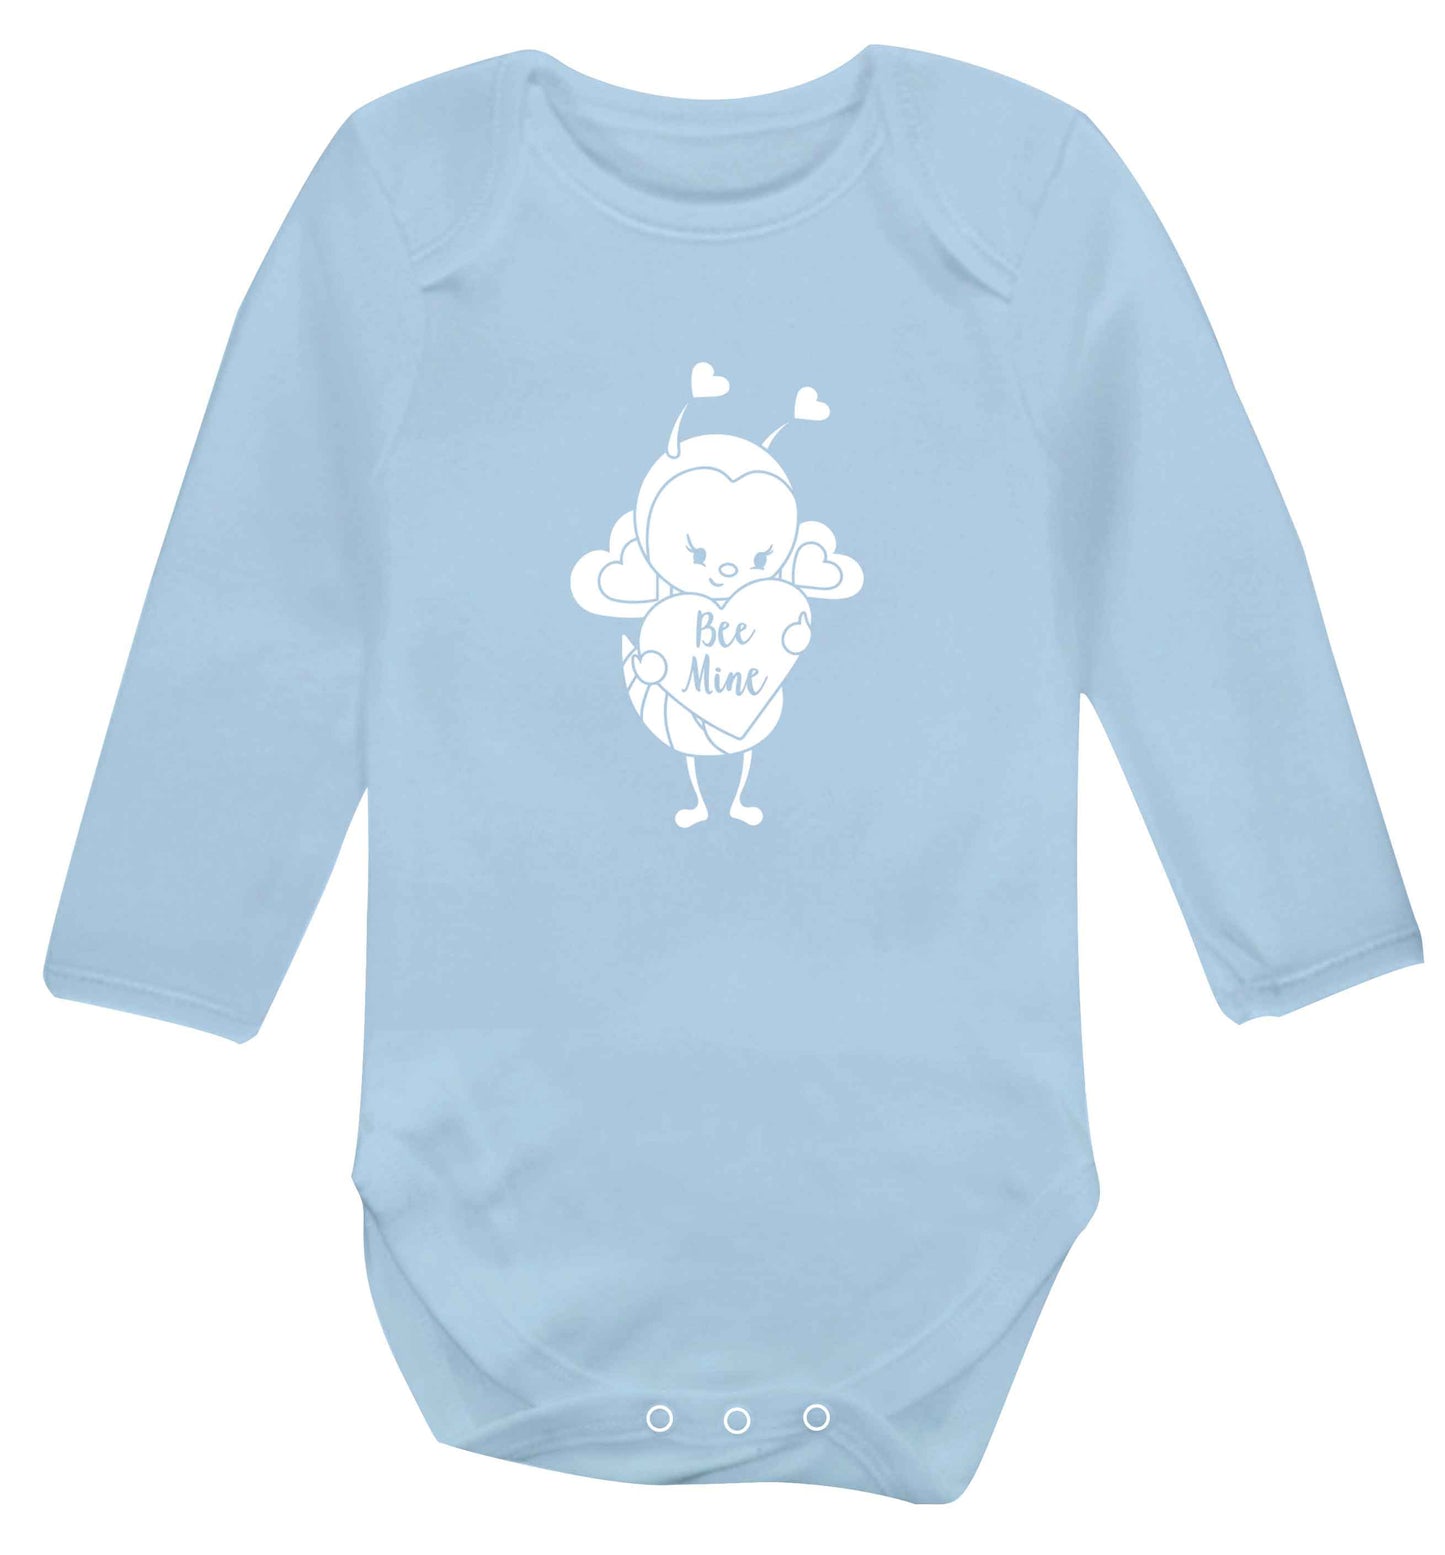 Bee mine baby vest long sleeved pale blue 6-12 months